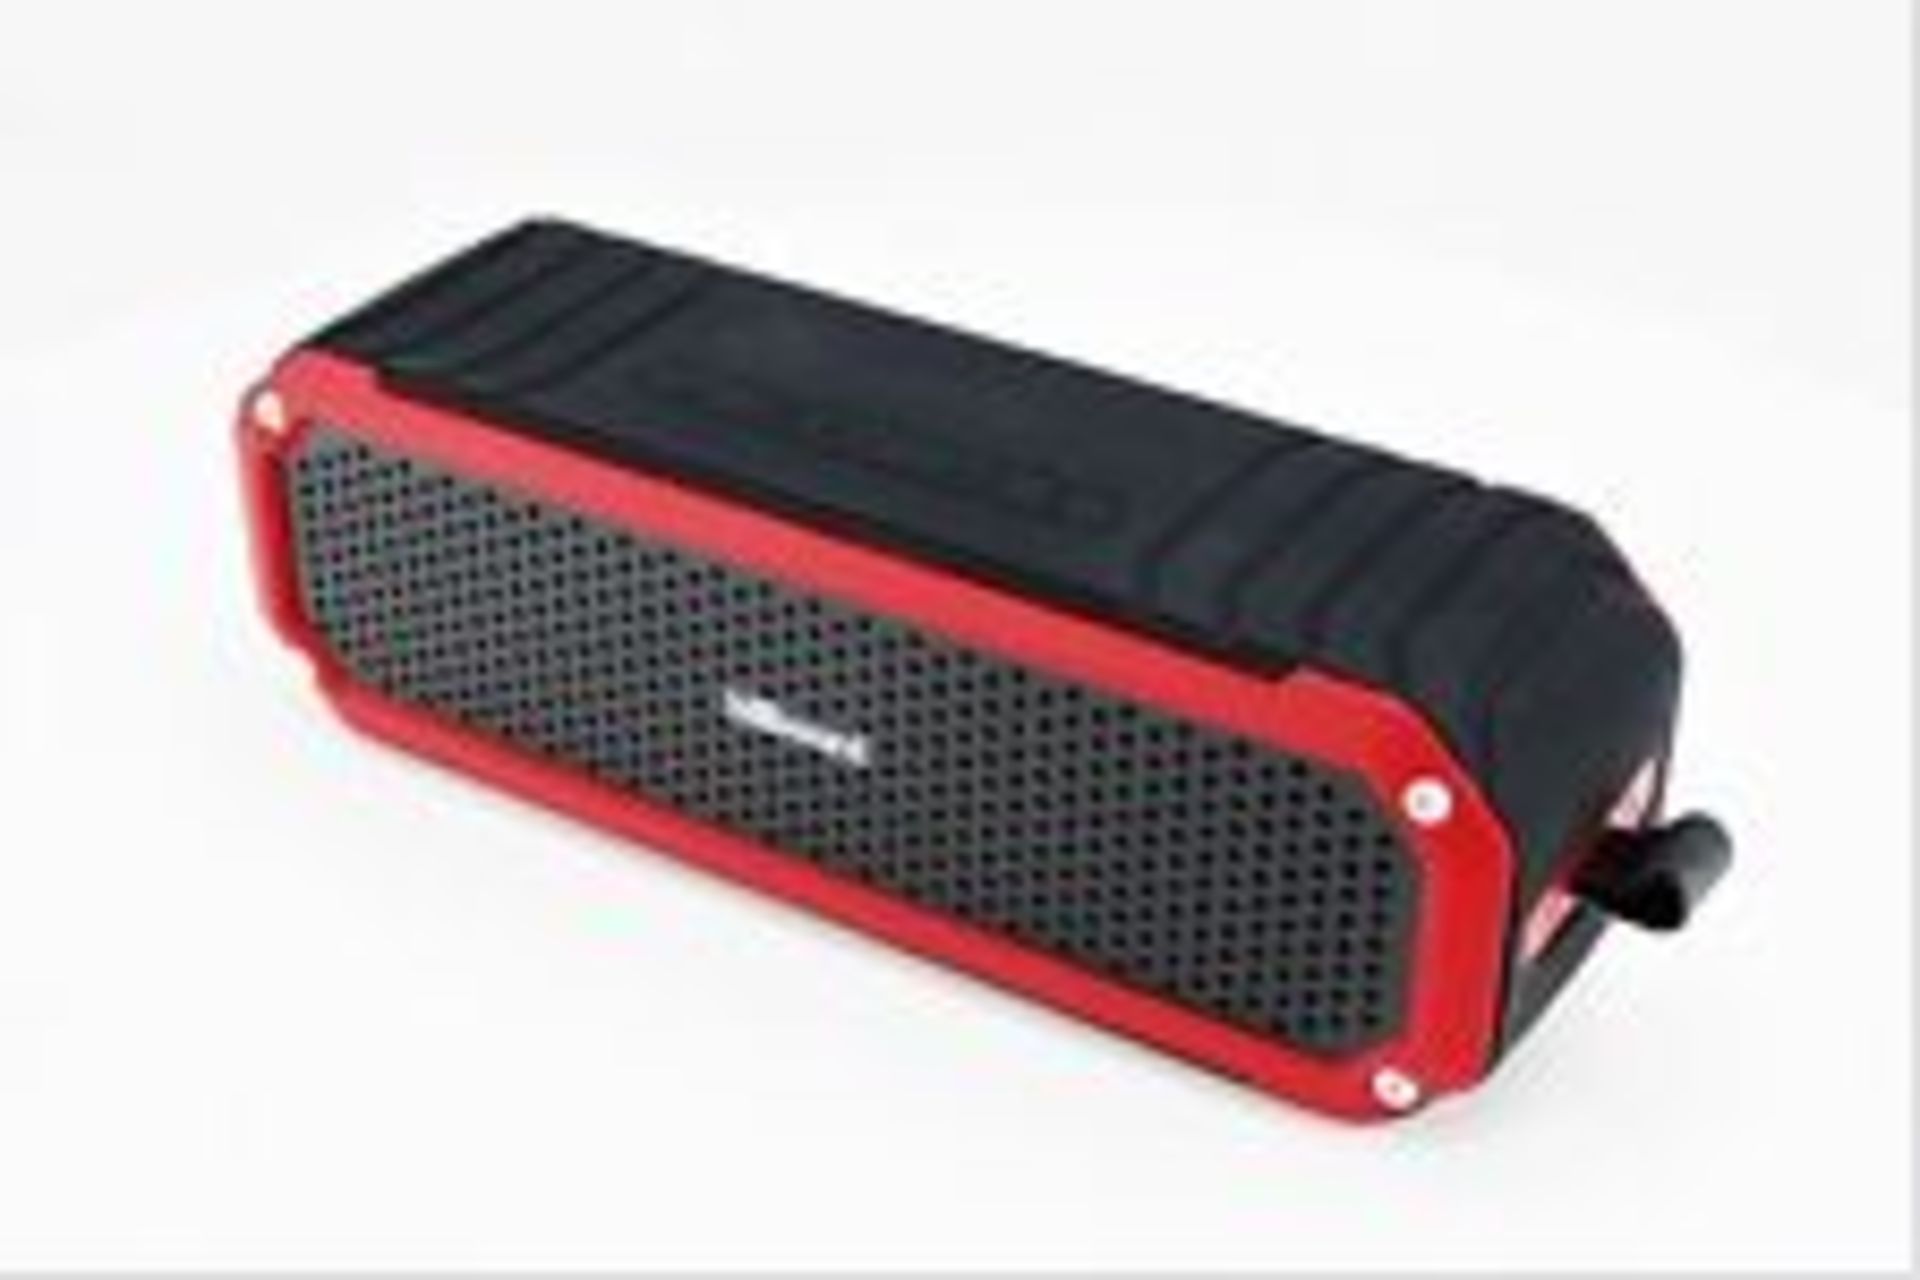 + VAT Brand New Billboard Rugged Wireless Speaker - Soft Touch Silicon Body IPx Water Resistant